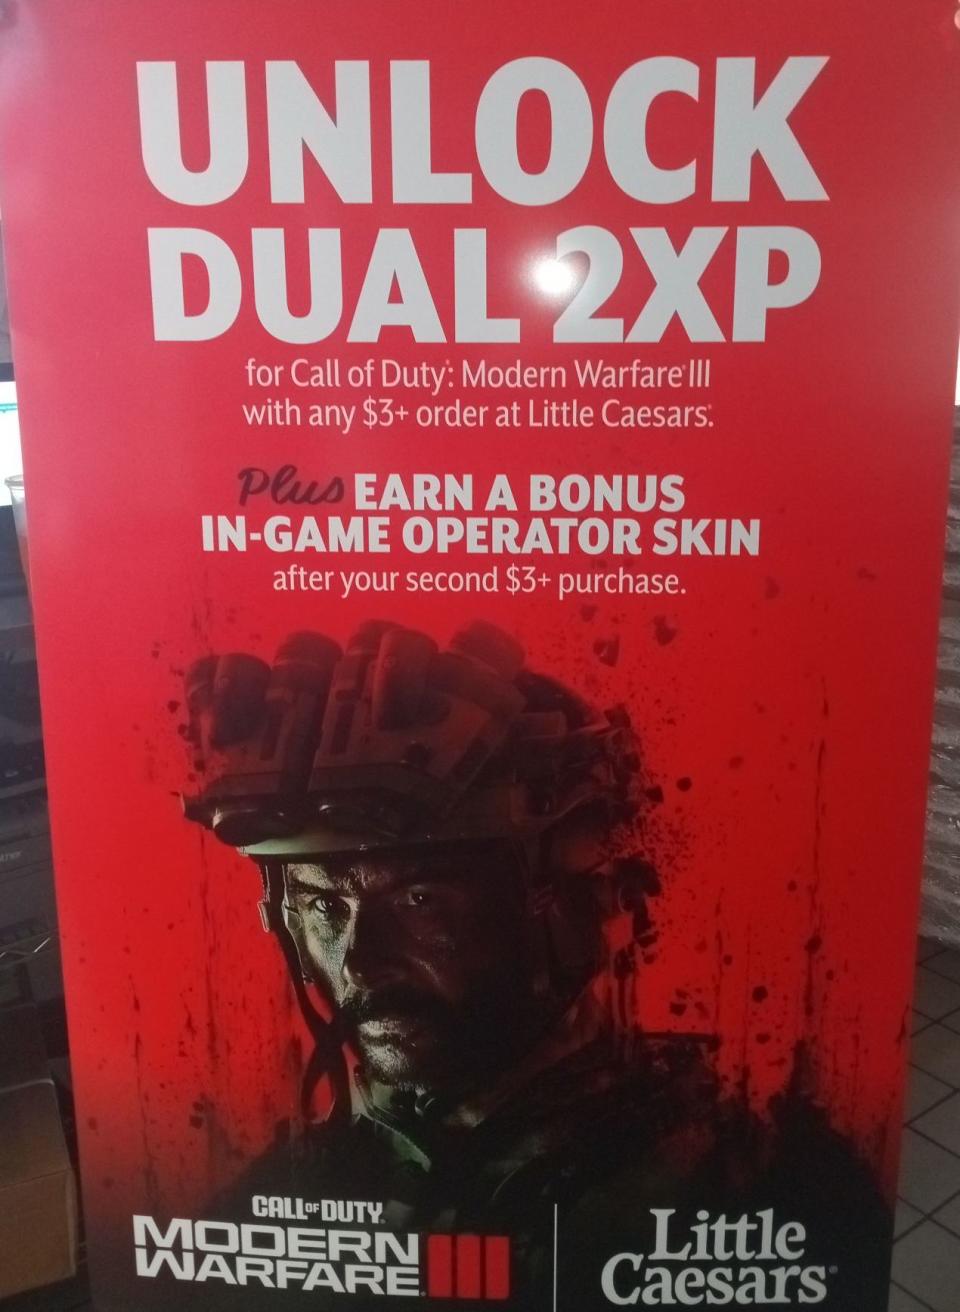 Call of Duty Double XP token promotion with Little Caesars